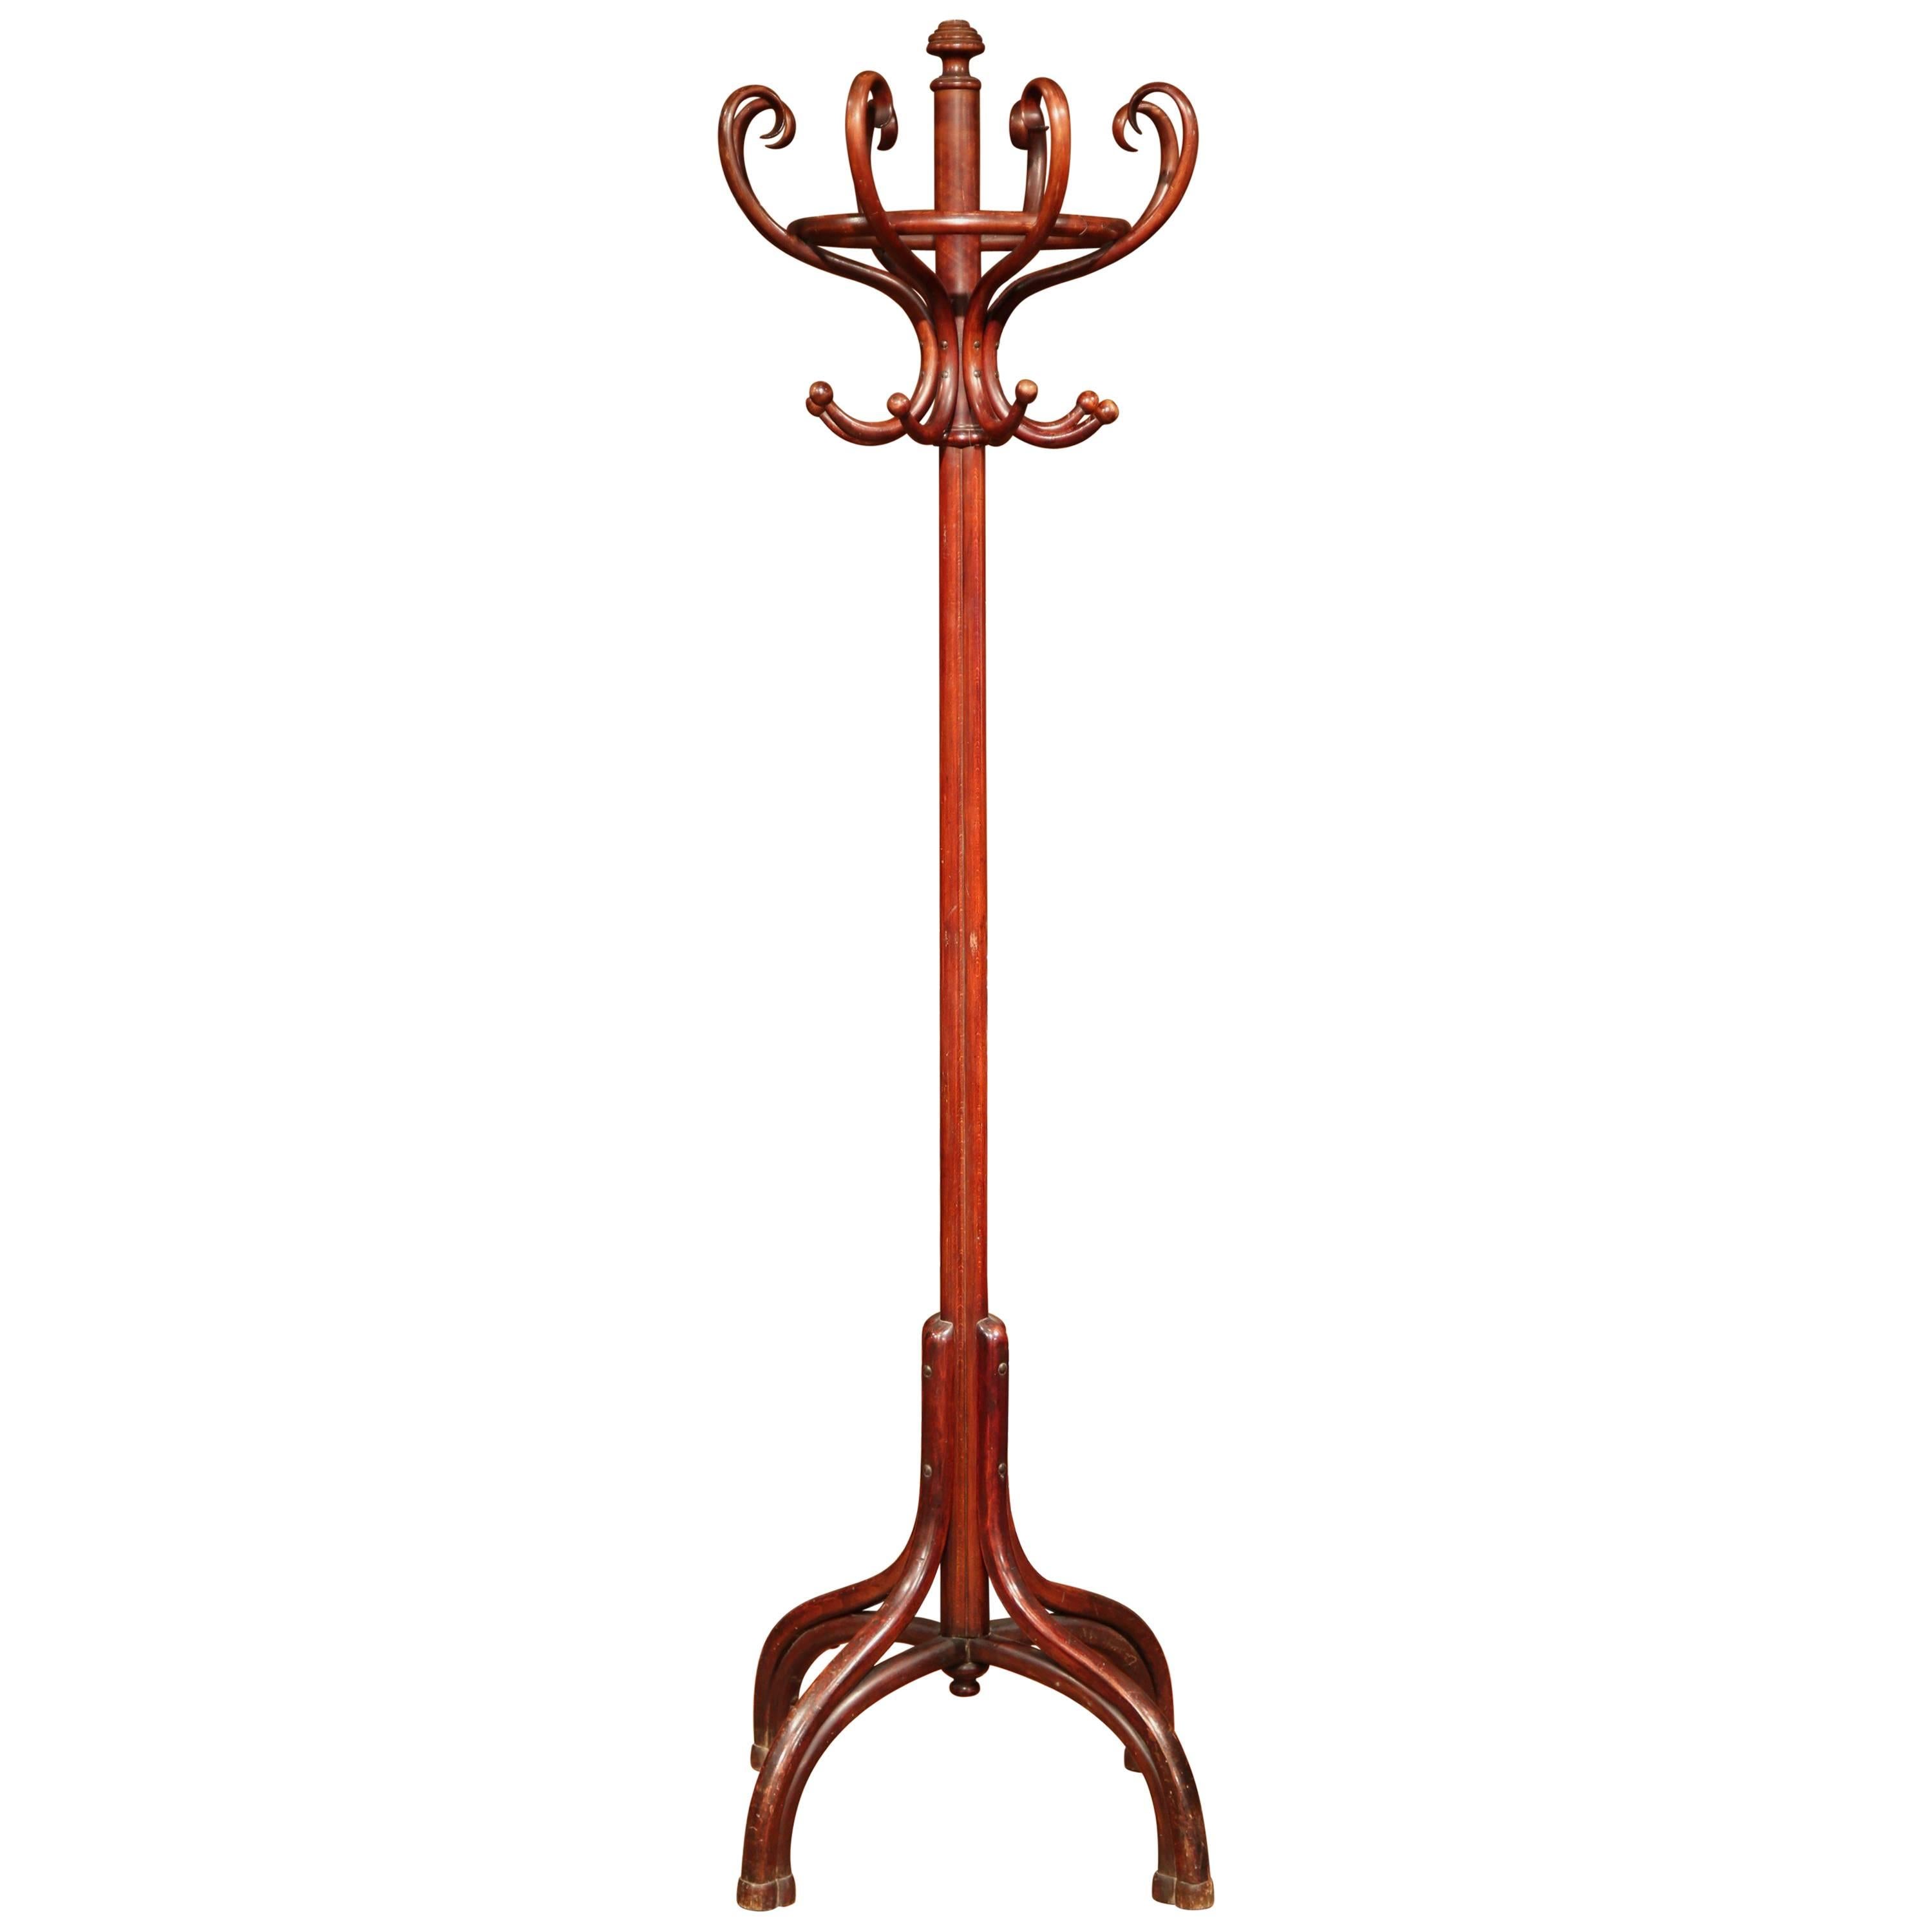 Early 20th Century French Bentwood Hall Tree with 16 Hooks Thonet Style